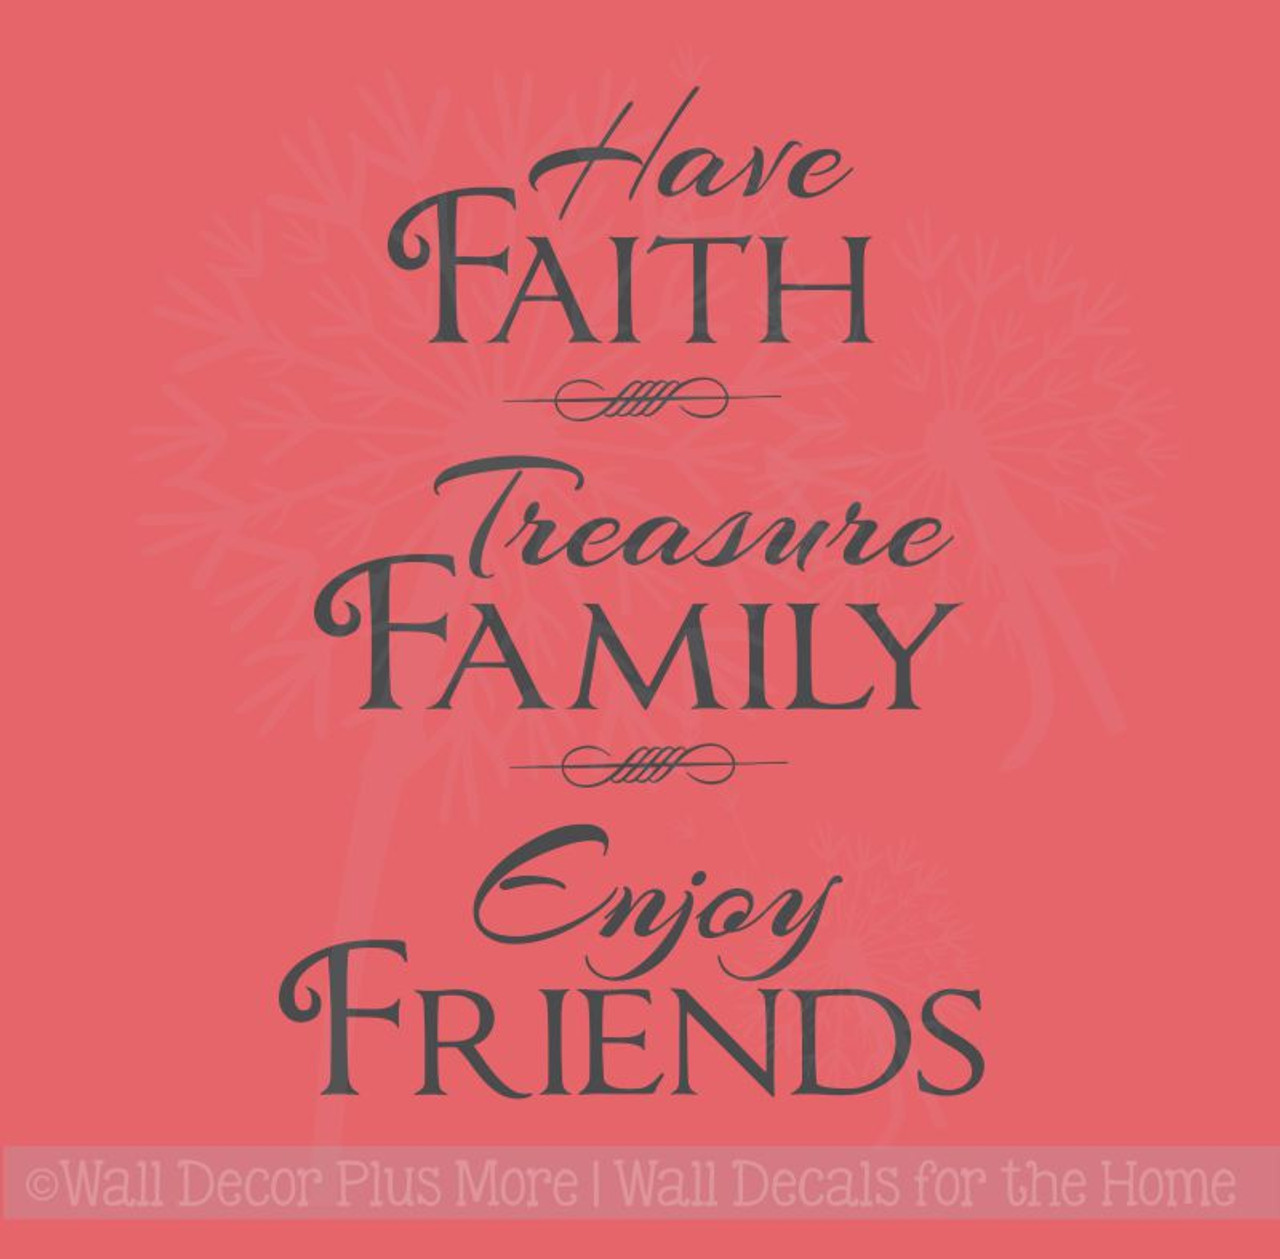 inspirational quotes about friendship and family